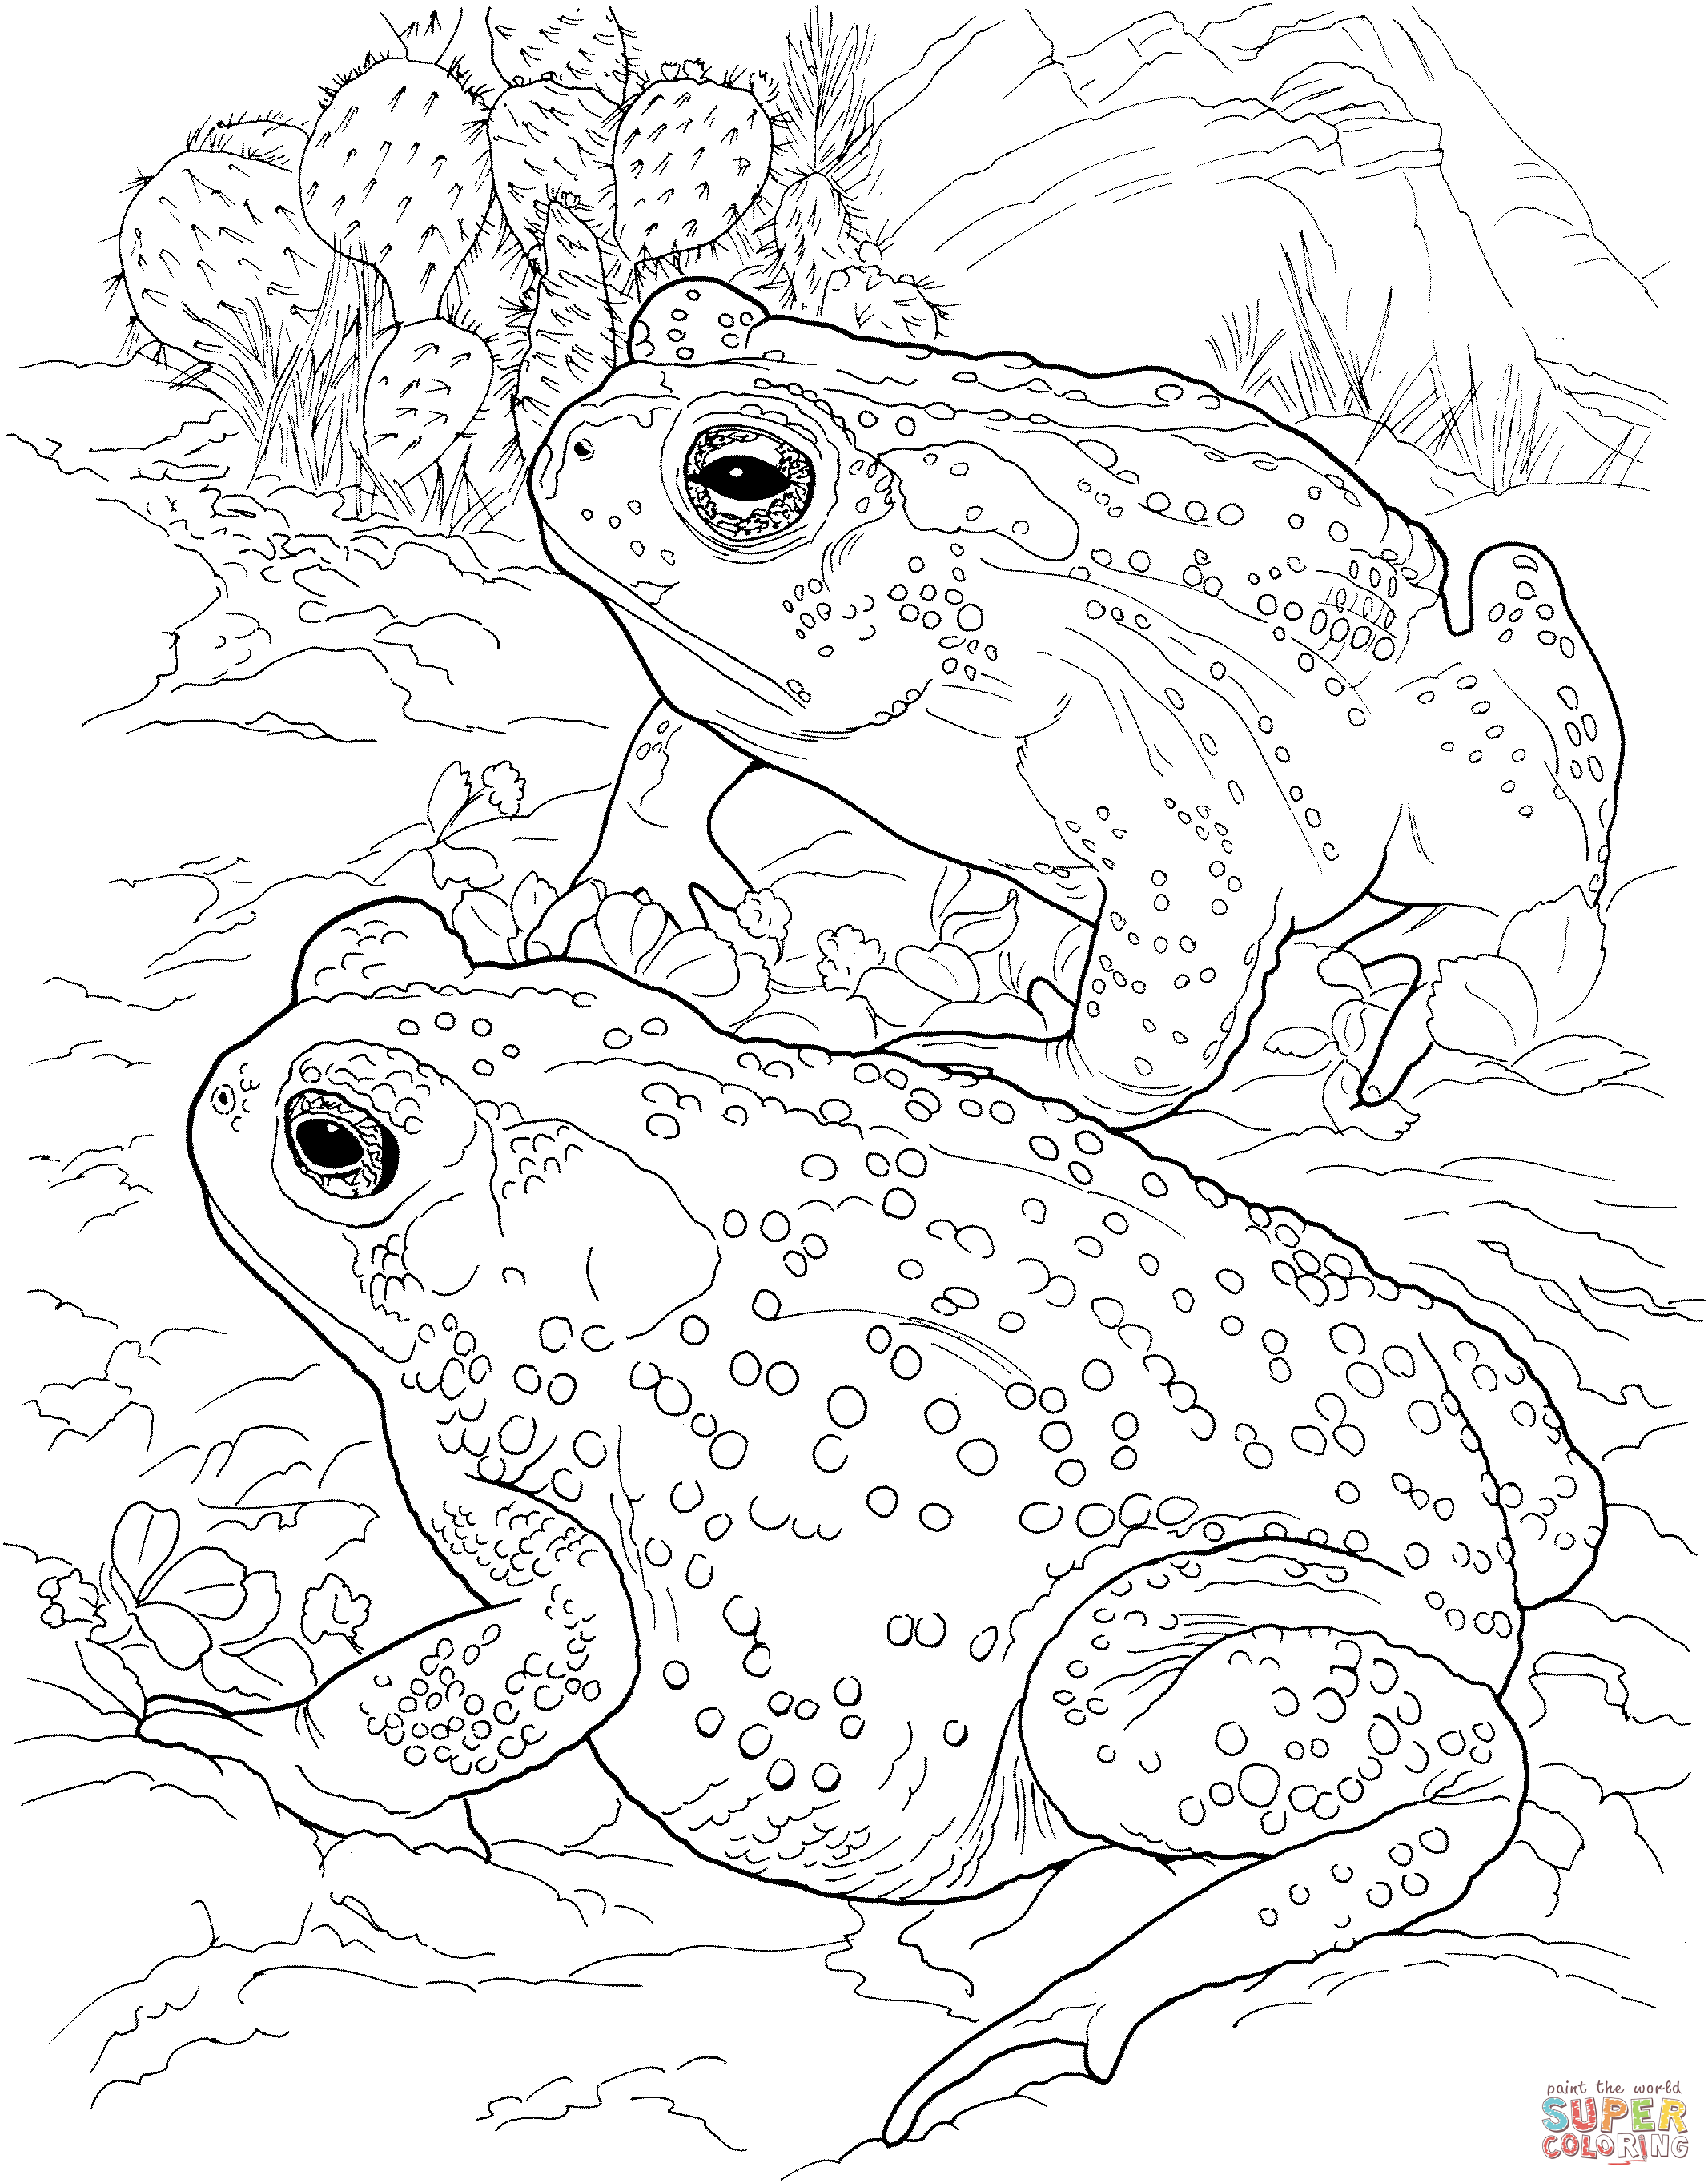 Toad coloring #6, Download drawings